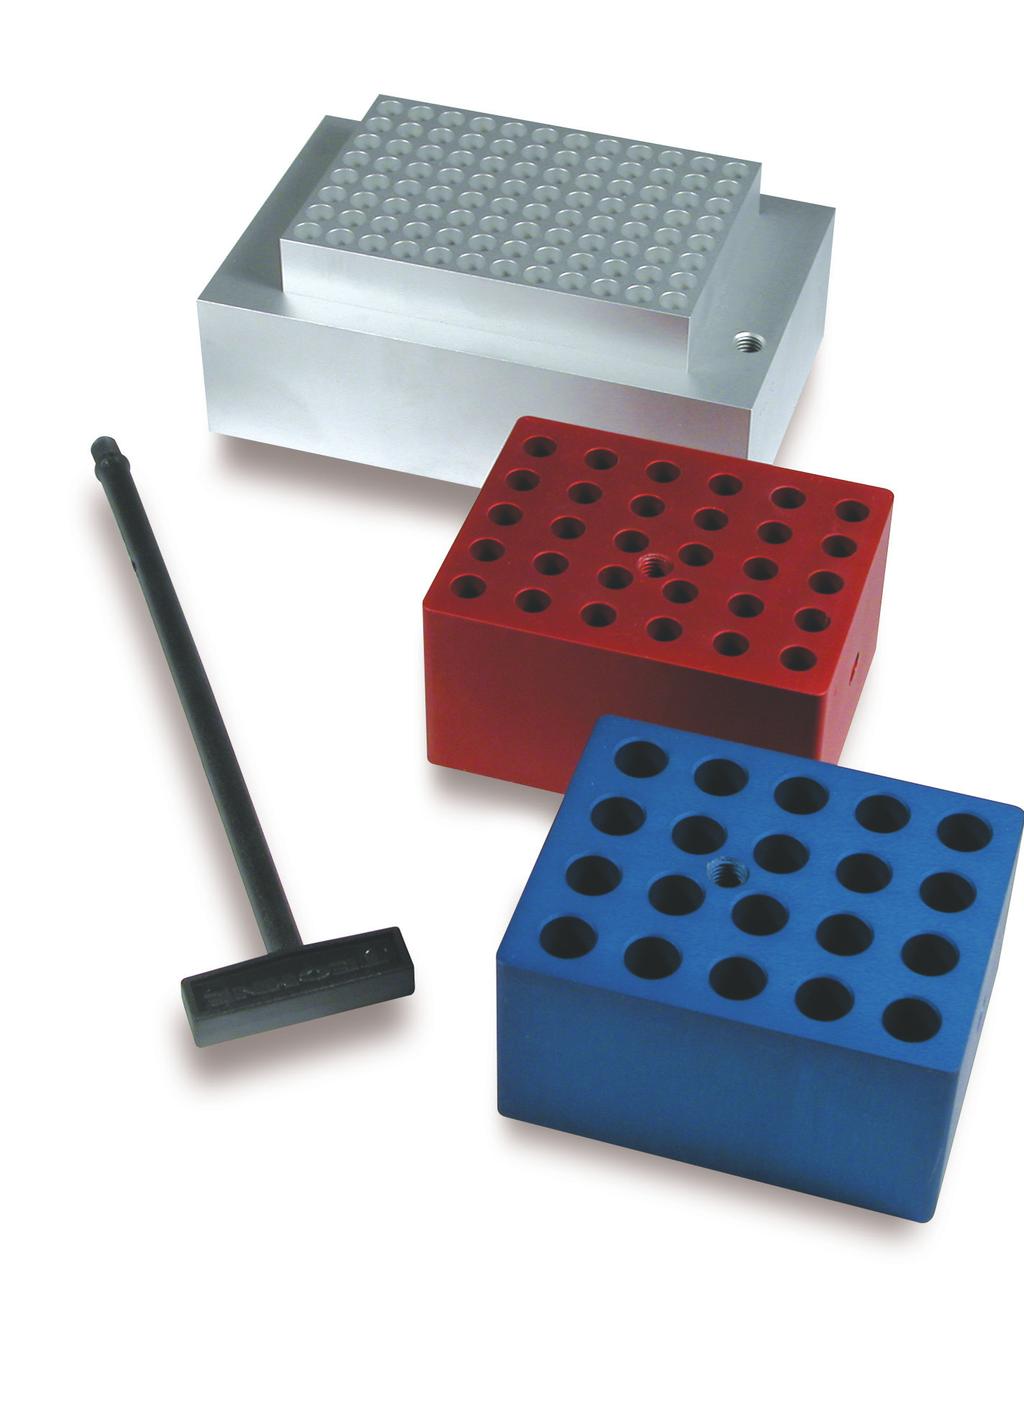 Techne Aluminium blocks Manufactured from anodised aluminium, Techne has the widest choice of interchangeable block inserts of any manufacturer.